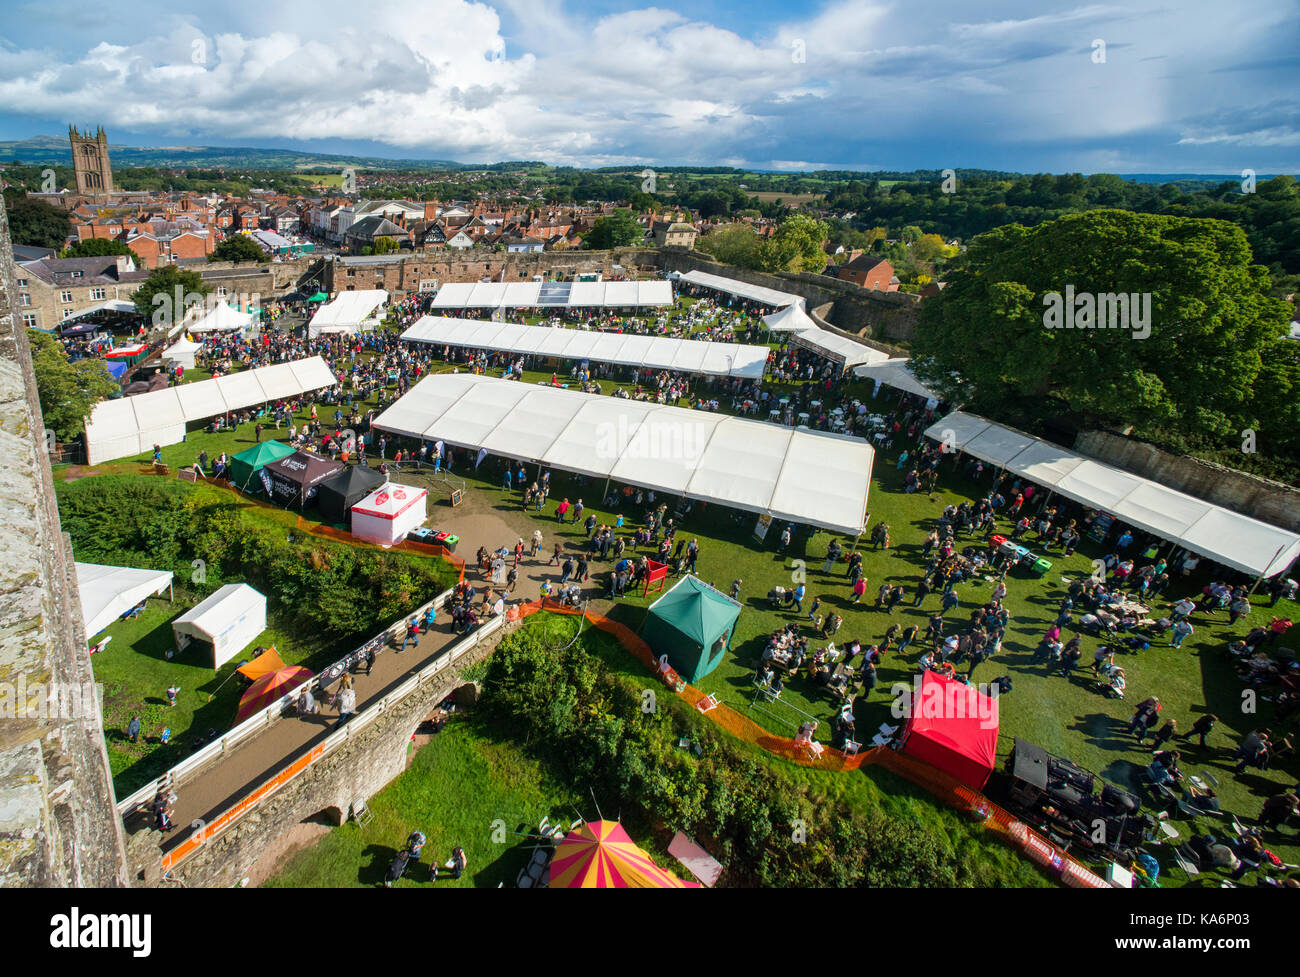 The 2017 Ludlow Food Festival seen from the Great Tower of Ludlow Castle, Shropshire. Stock Photo